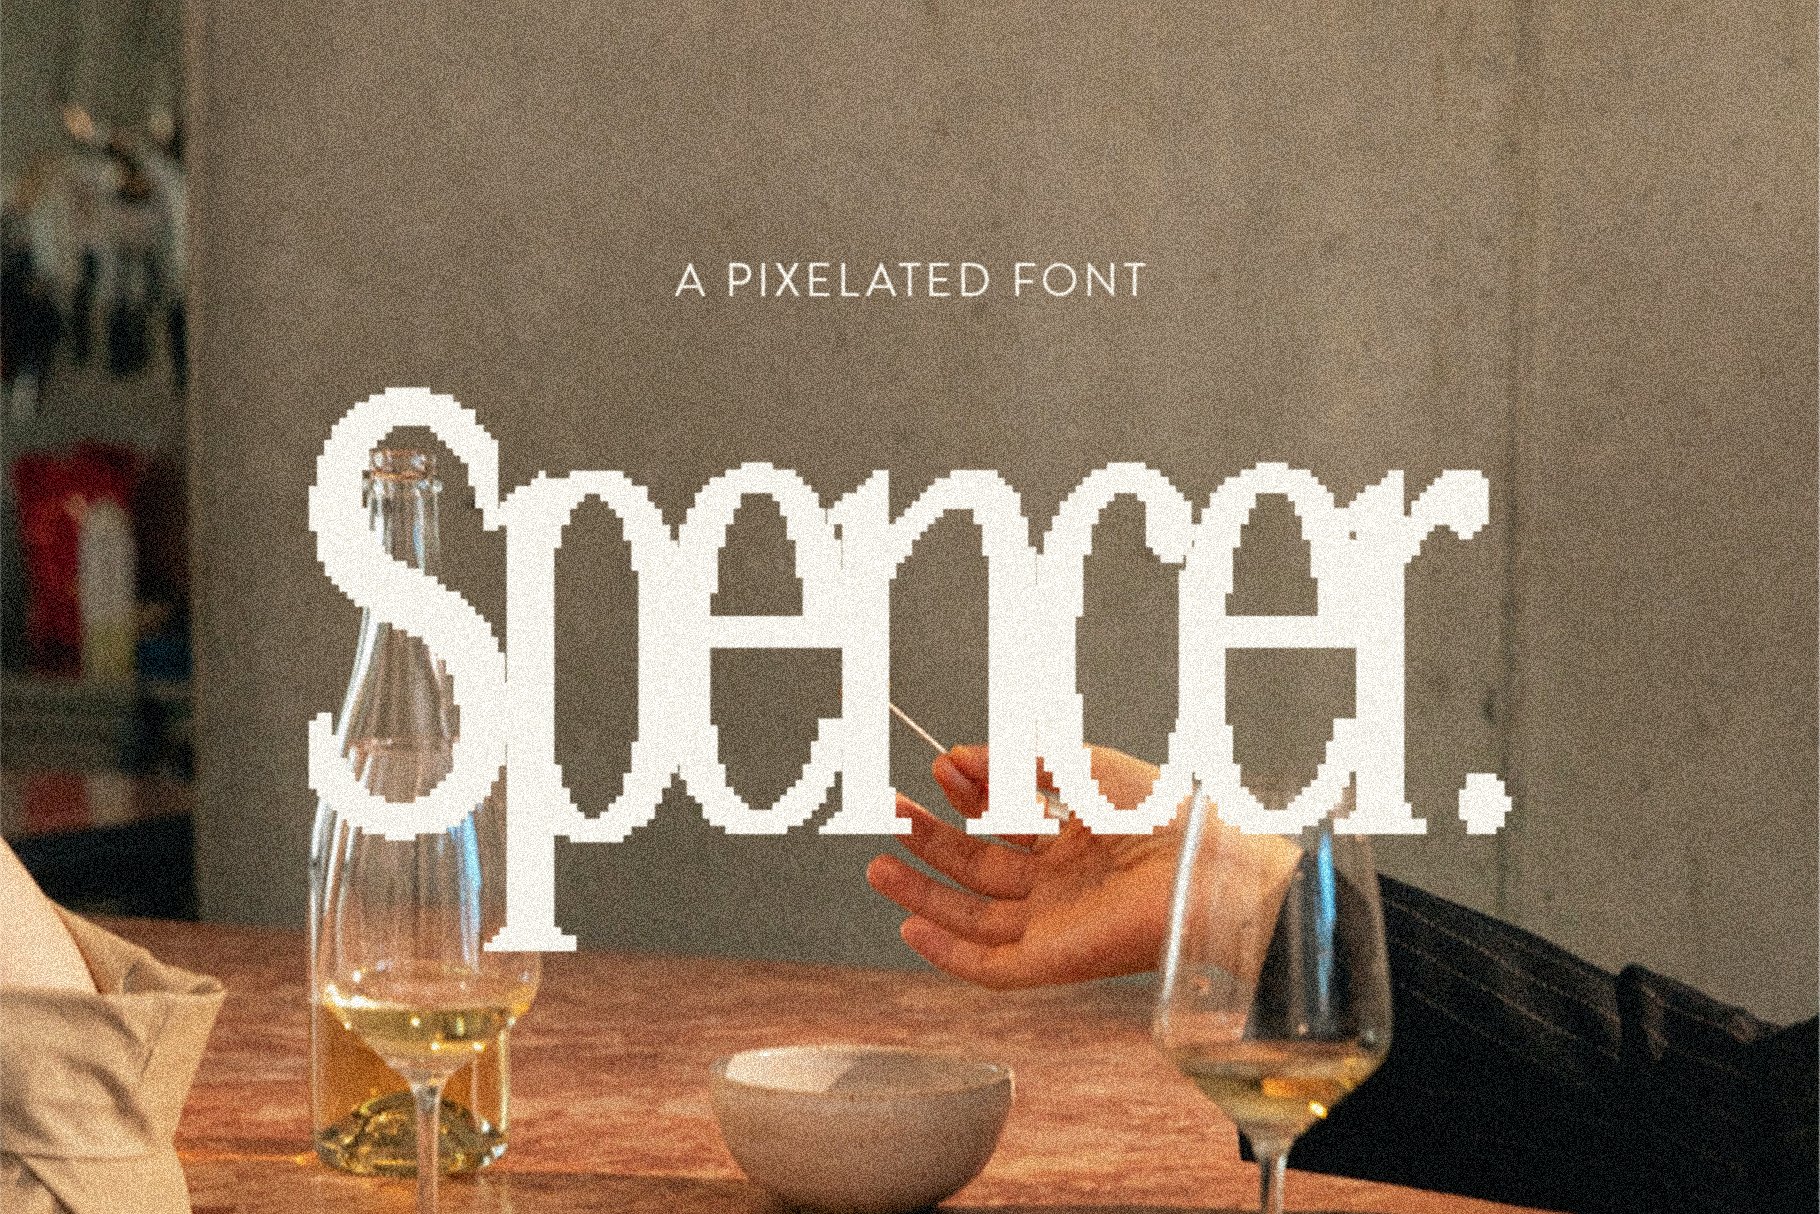 Spencer | A Pixelated Fontcover image.